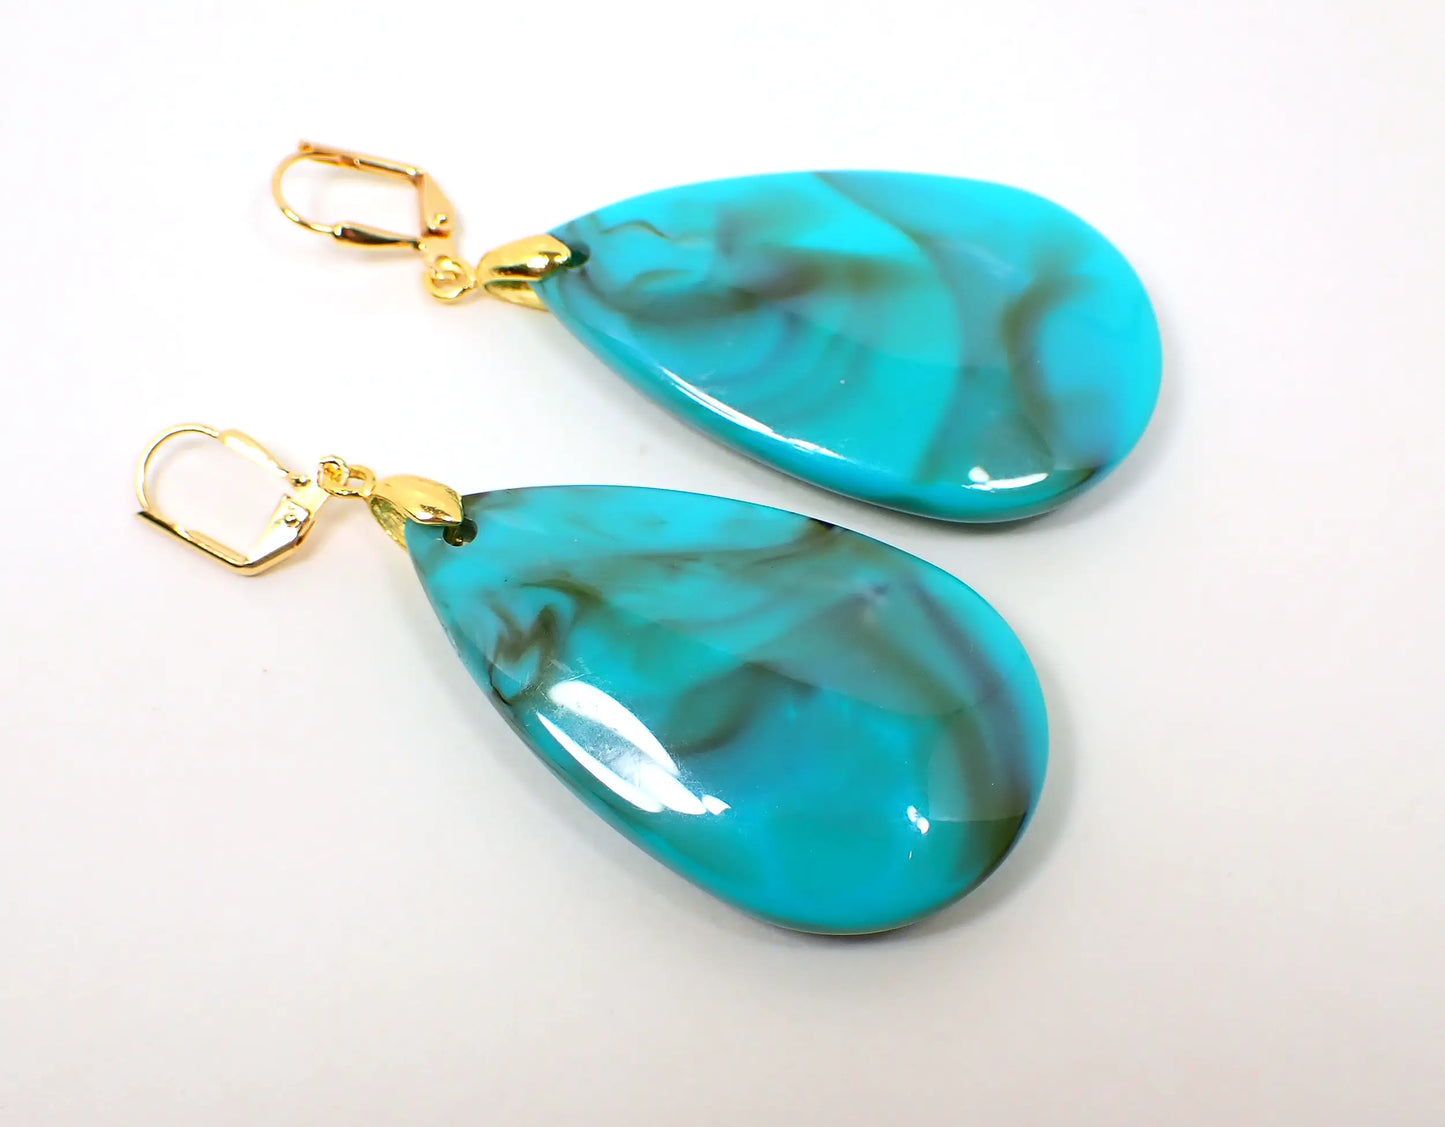 Big Marbled Blue and Brown Acrylic Handmade Teardrop Earrings, Gold Plated Hook Lever Back or Clip On